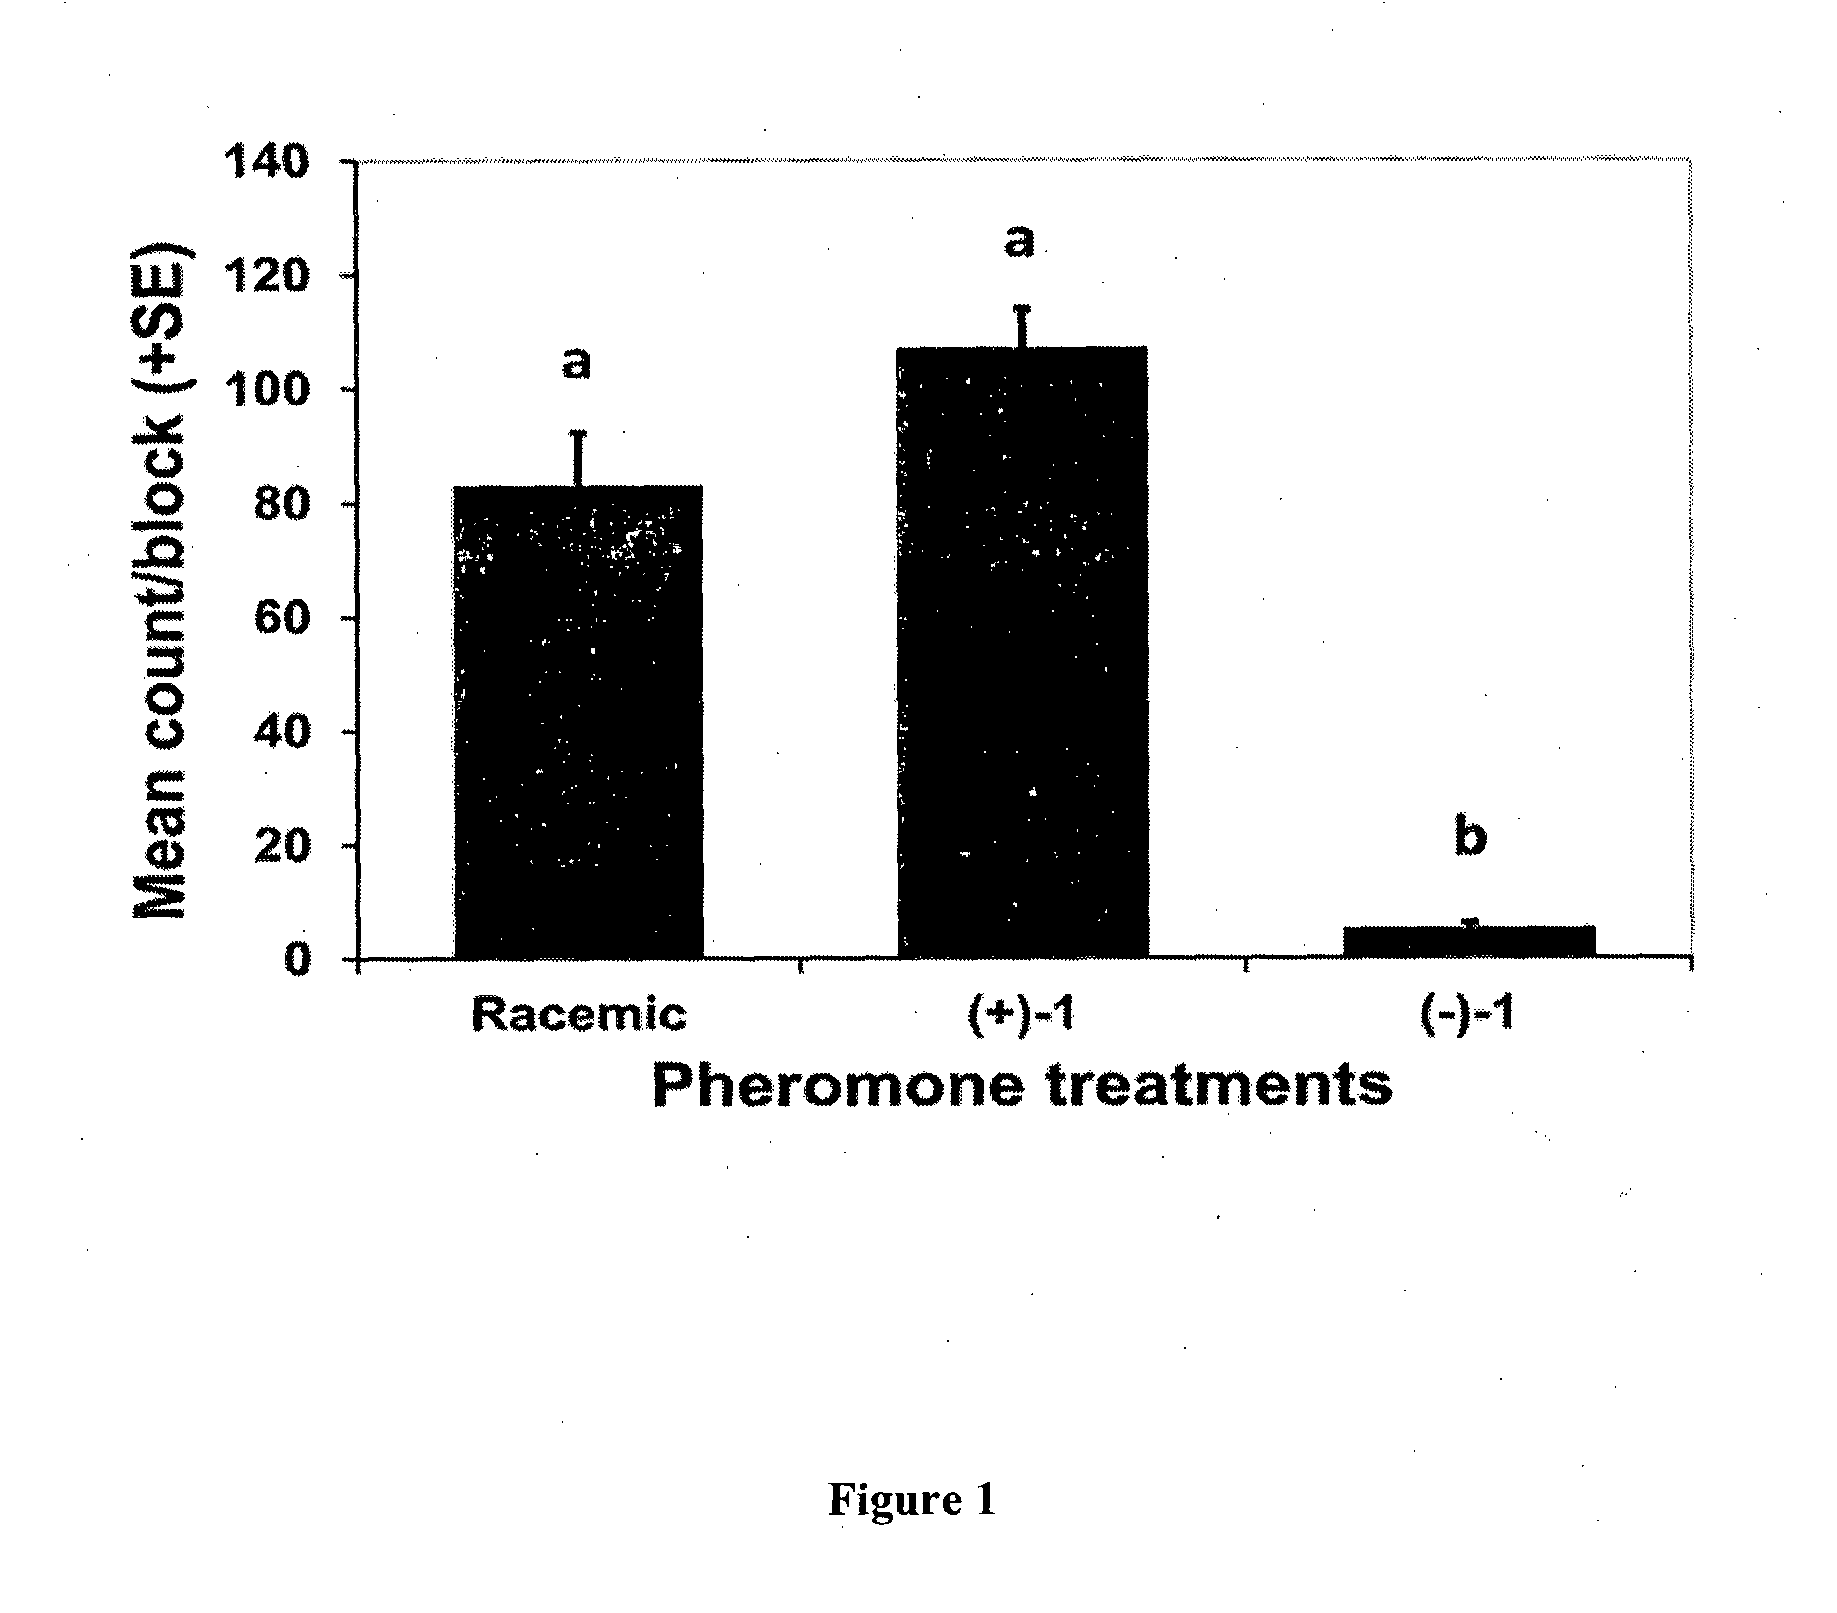 Enantioselective process for the preparation of enantiomers of sex pheromones